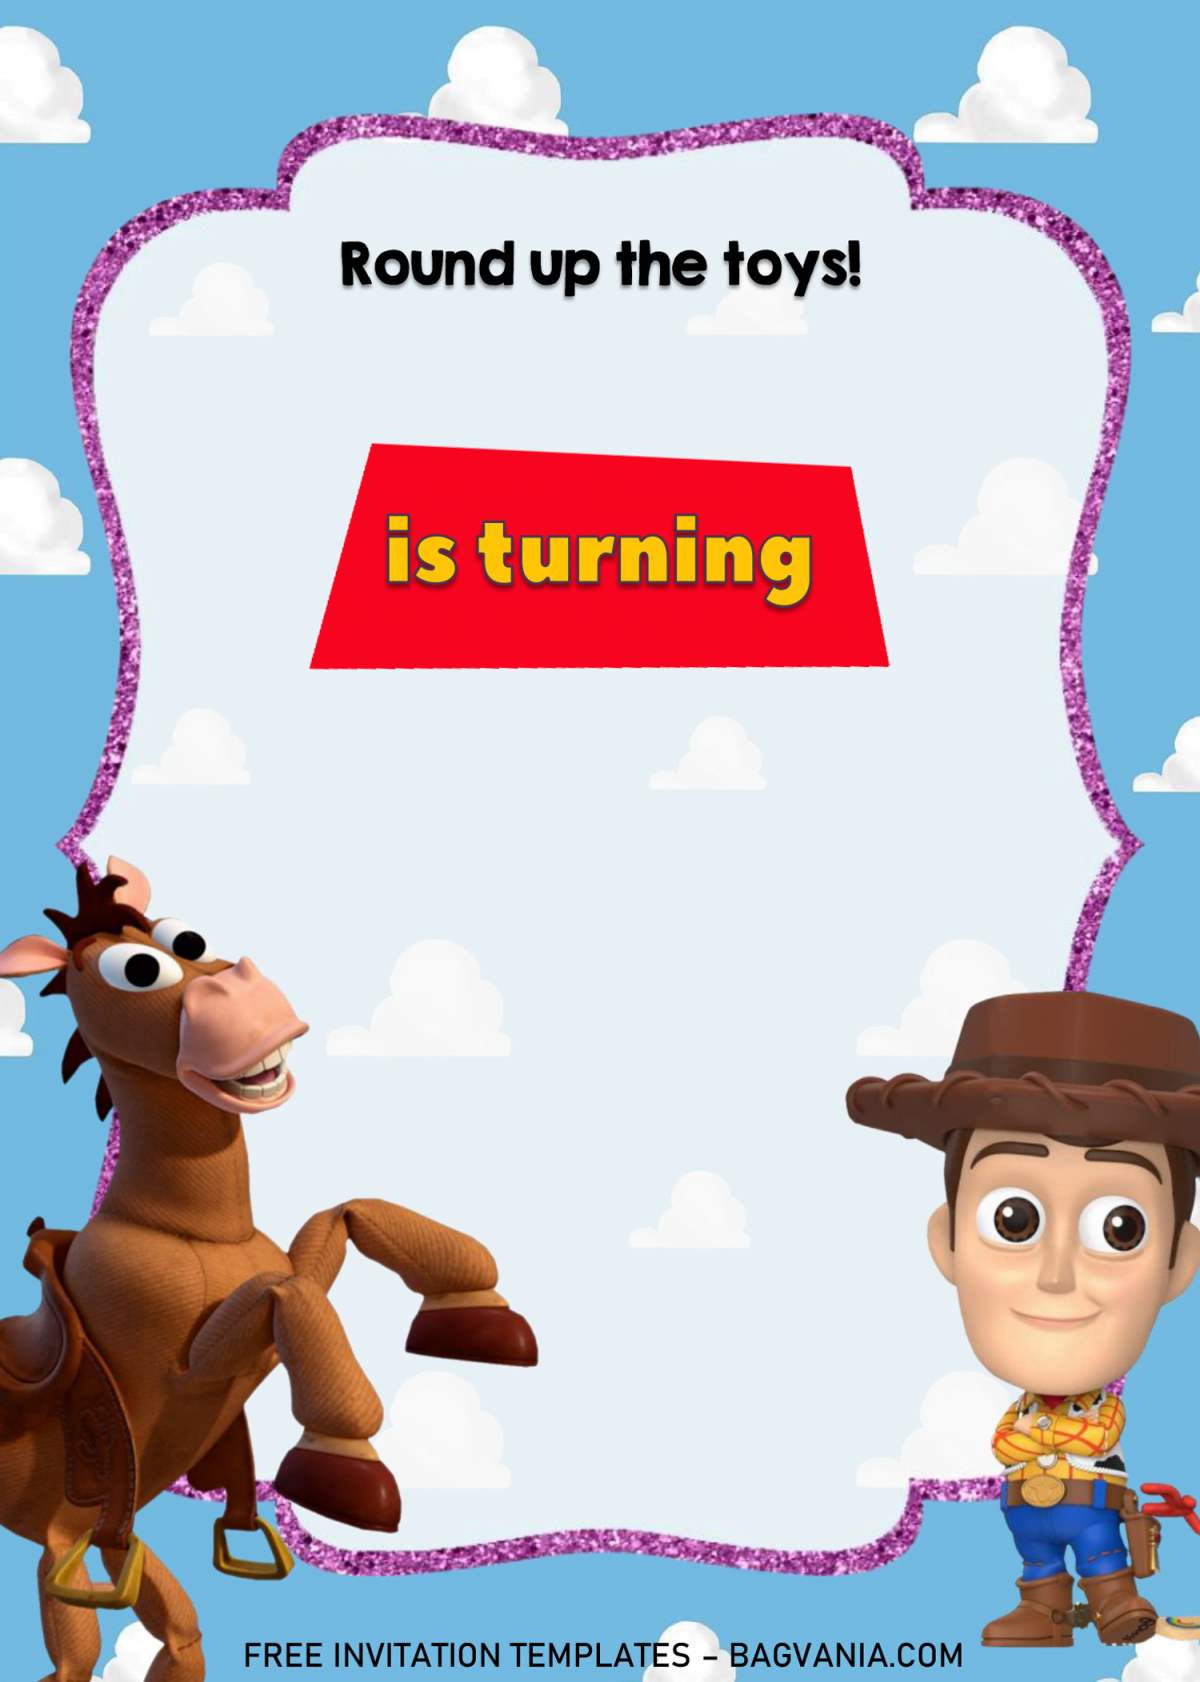 Toy Story Invitation Templates - Editable With MS Word and has transparent text frame